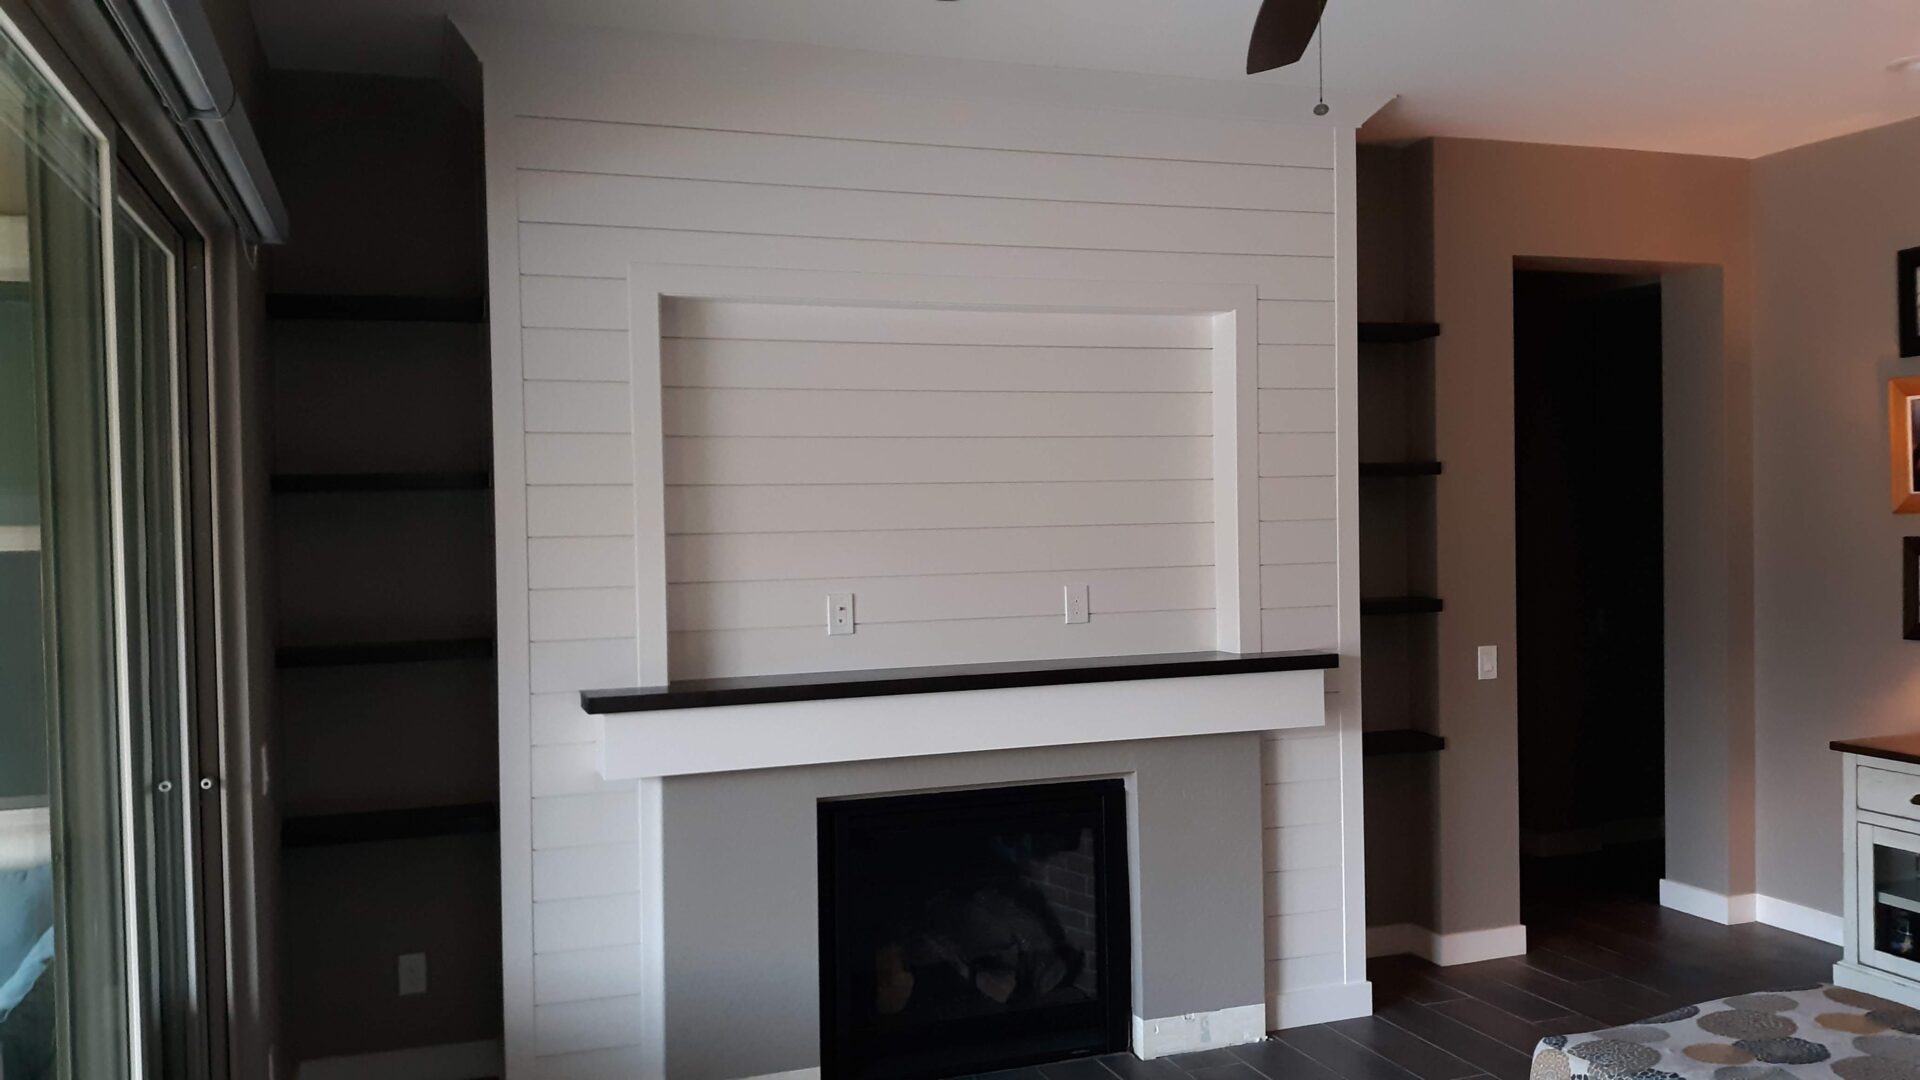 A fireplace with a mantle and built in shelves.